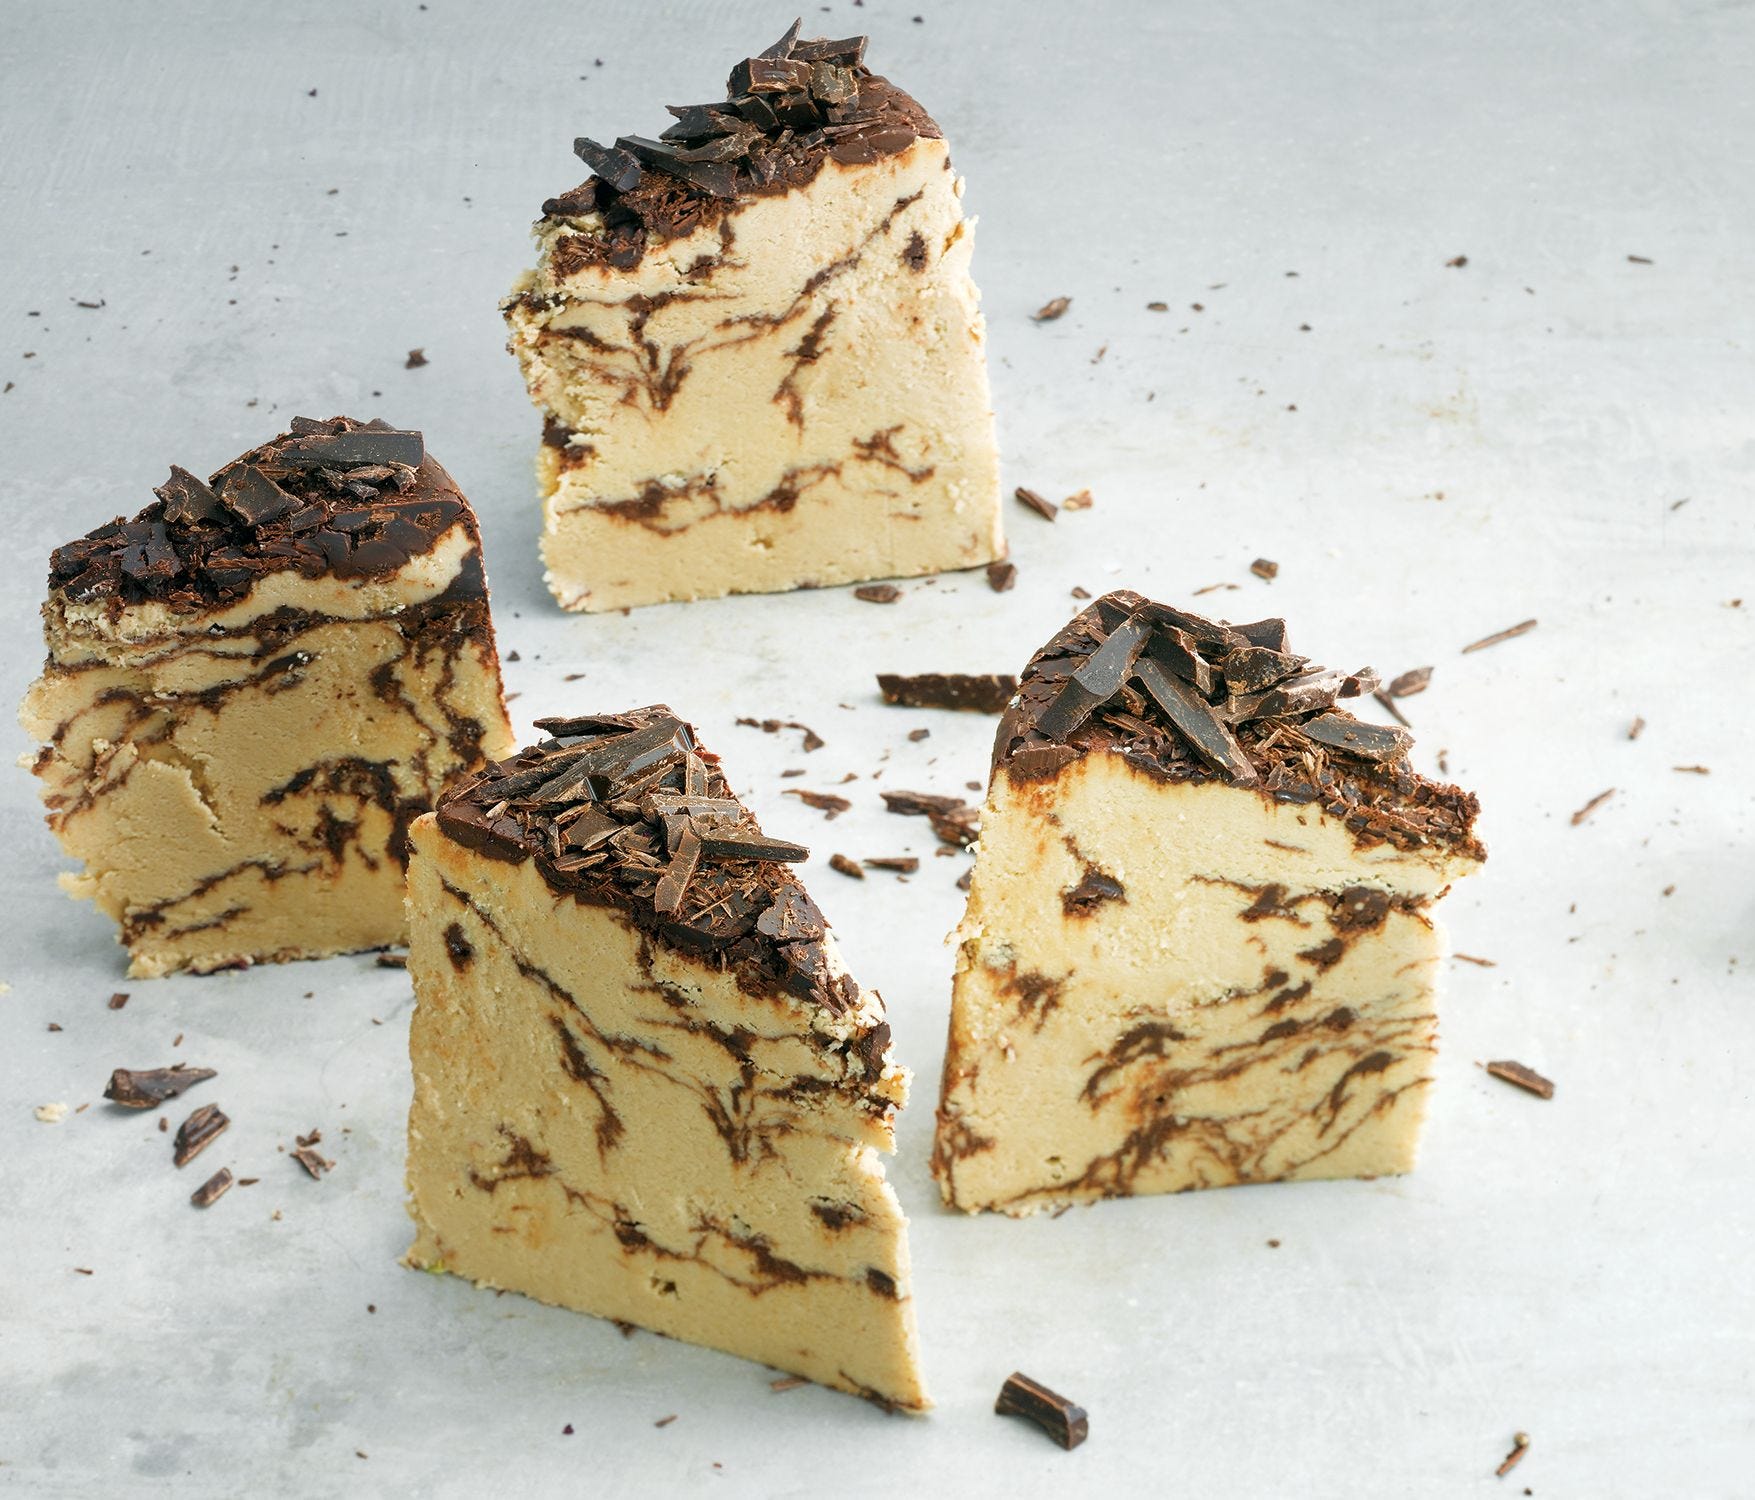 Halva, an ancient sweet with Middle Eastern roots, is used in creative ways at restaurants and retailers nationwide.